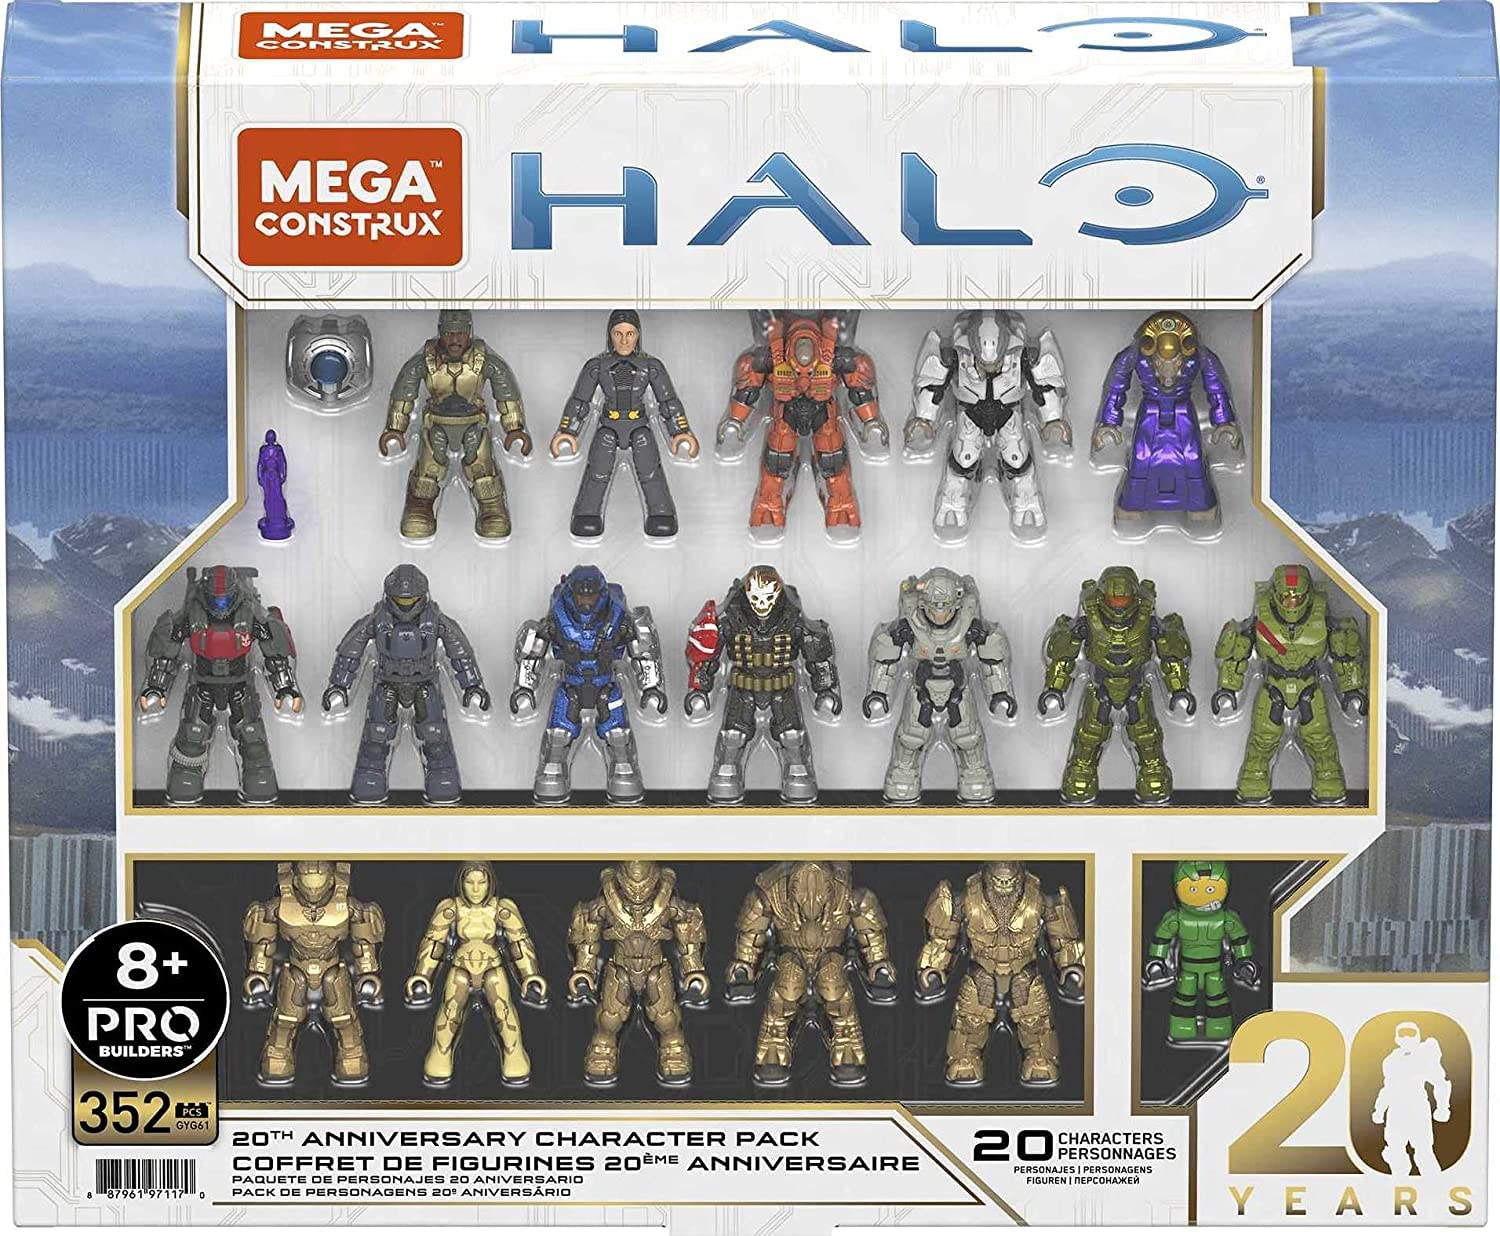 MEGA Halo Action Figures Toy Building Set, 20th Anniversary Pack with 352PIeces, 20 Poseable, Collectable Characters and Accessorie (Amazon Exclusive)